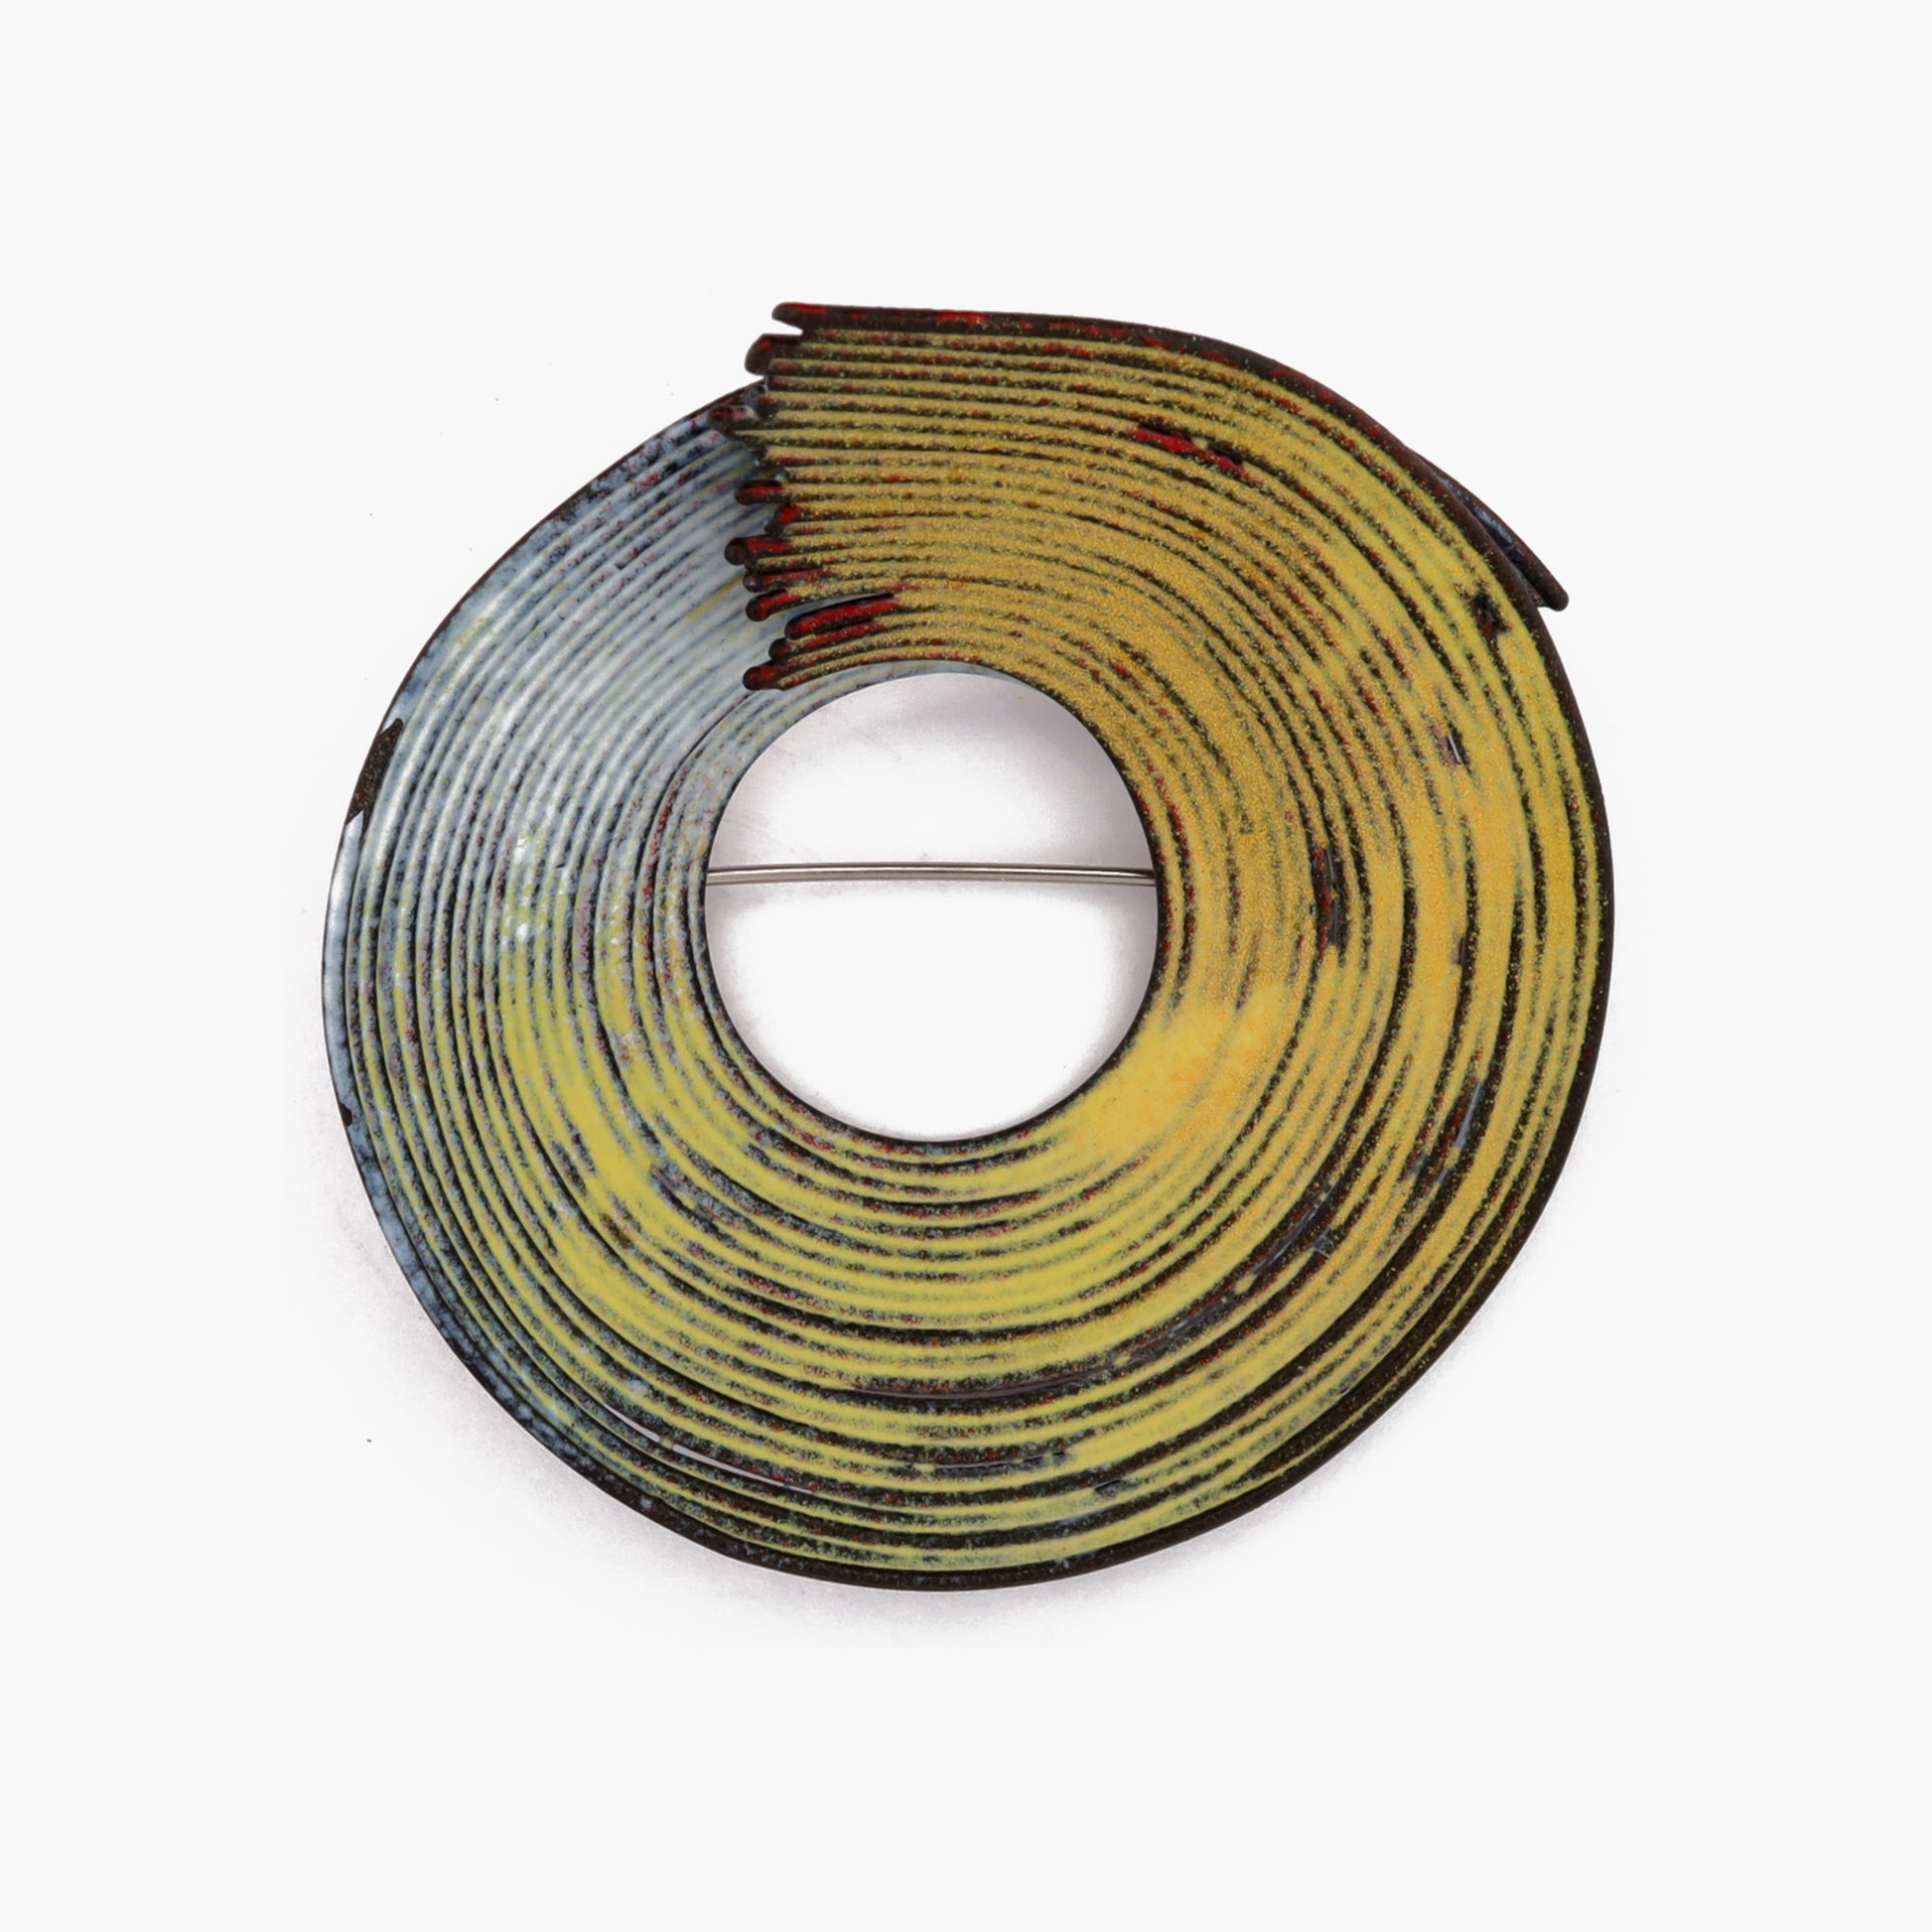 Front view of a brooch made of fine wires of enameled steel in yellow and white. The wires are arranged in a looping, organic shape that evokes the fluidity of brushstrokes in a painting. The brooch is work of jewellery artist Kye-Yeon Son